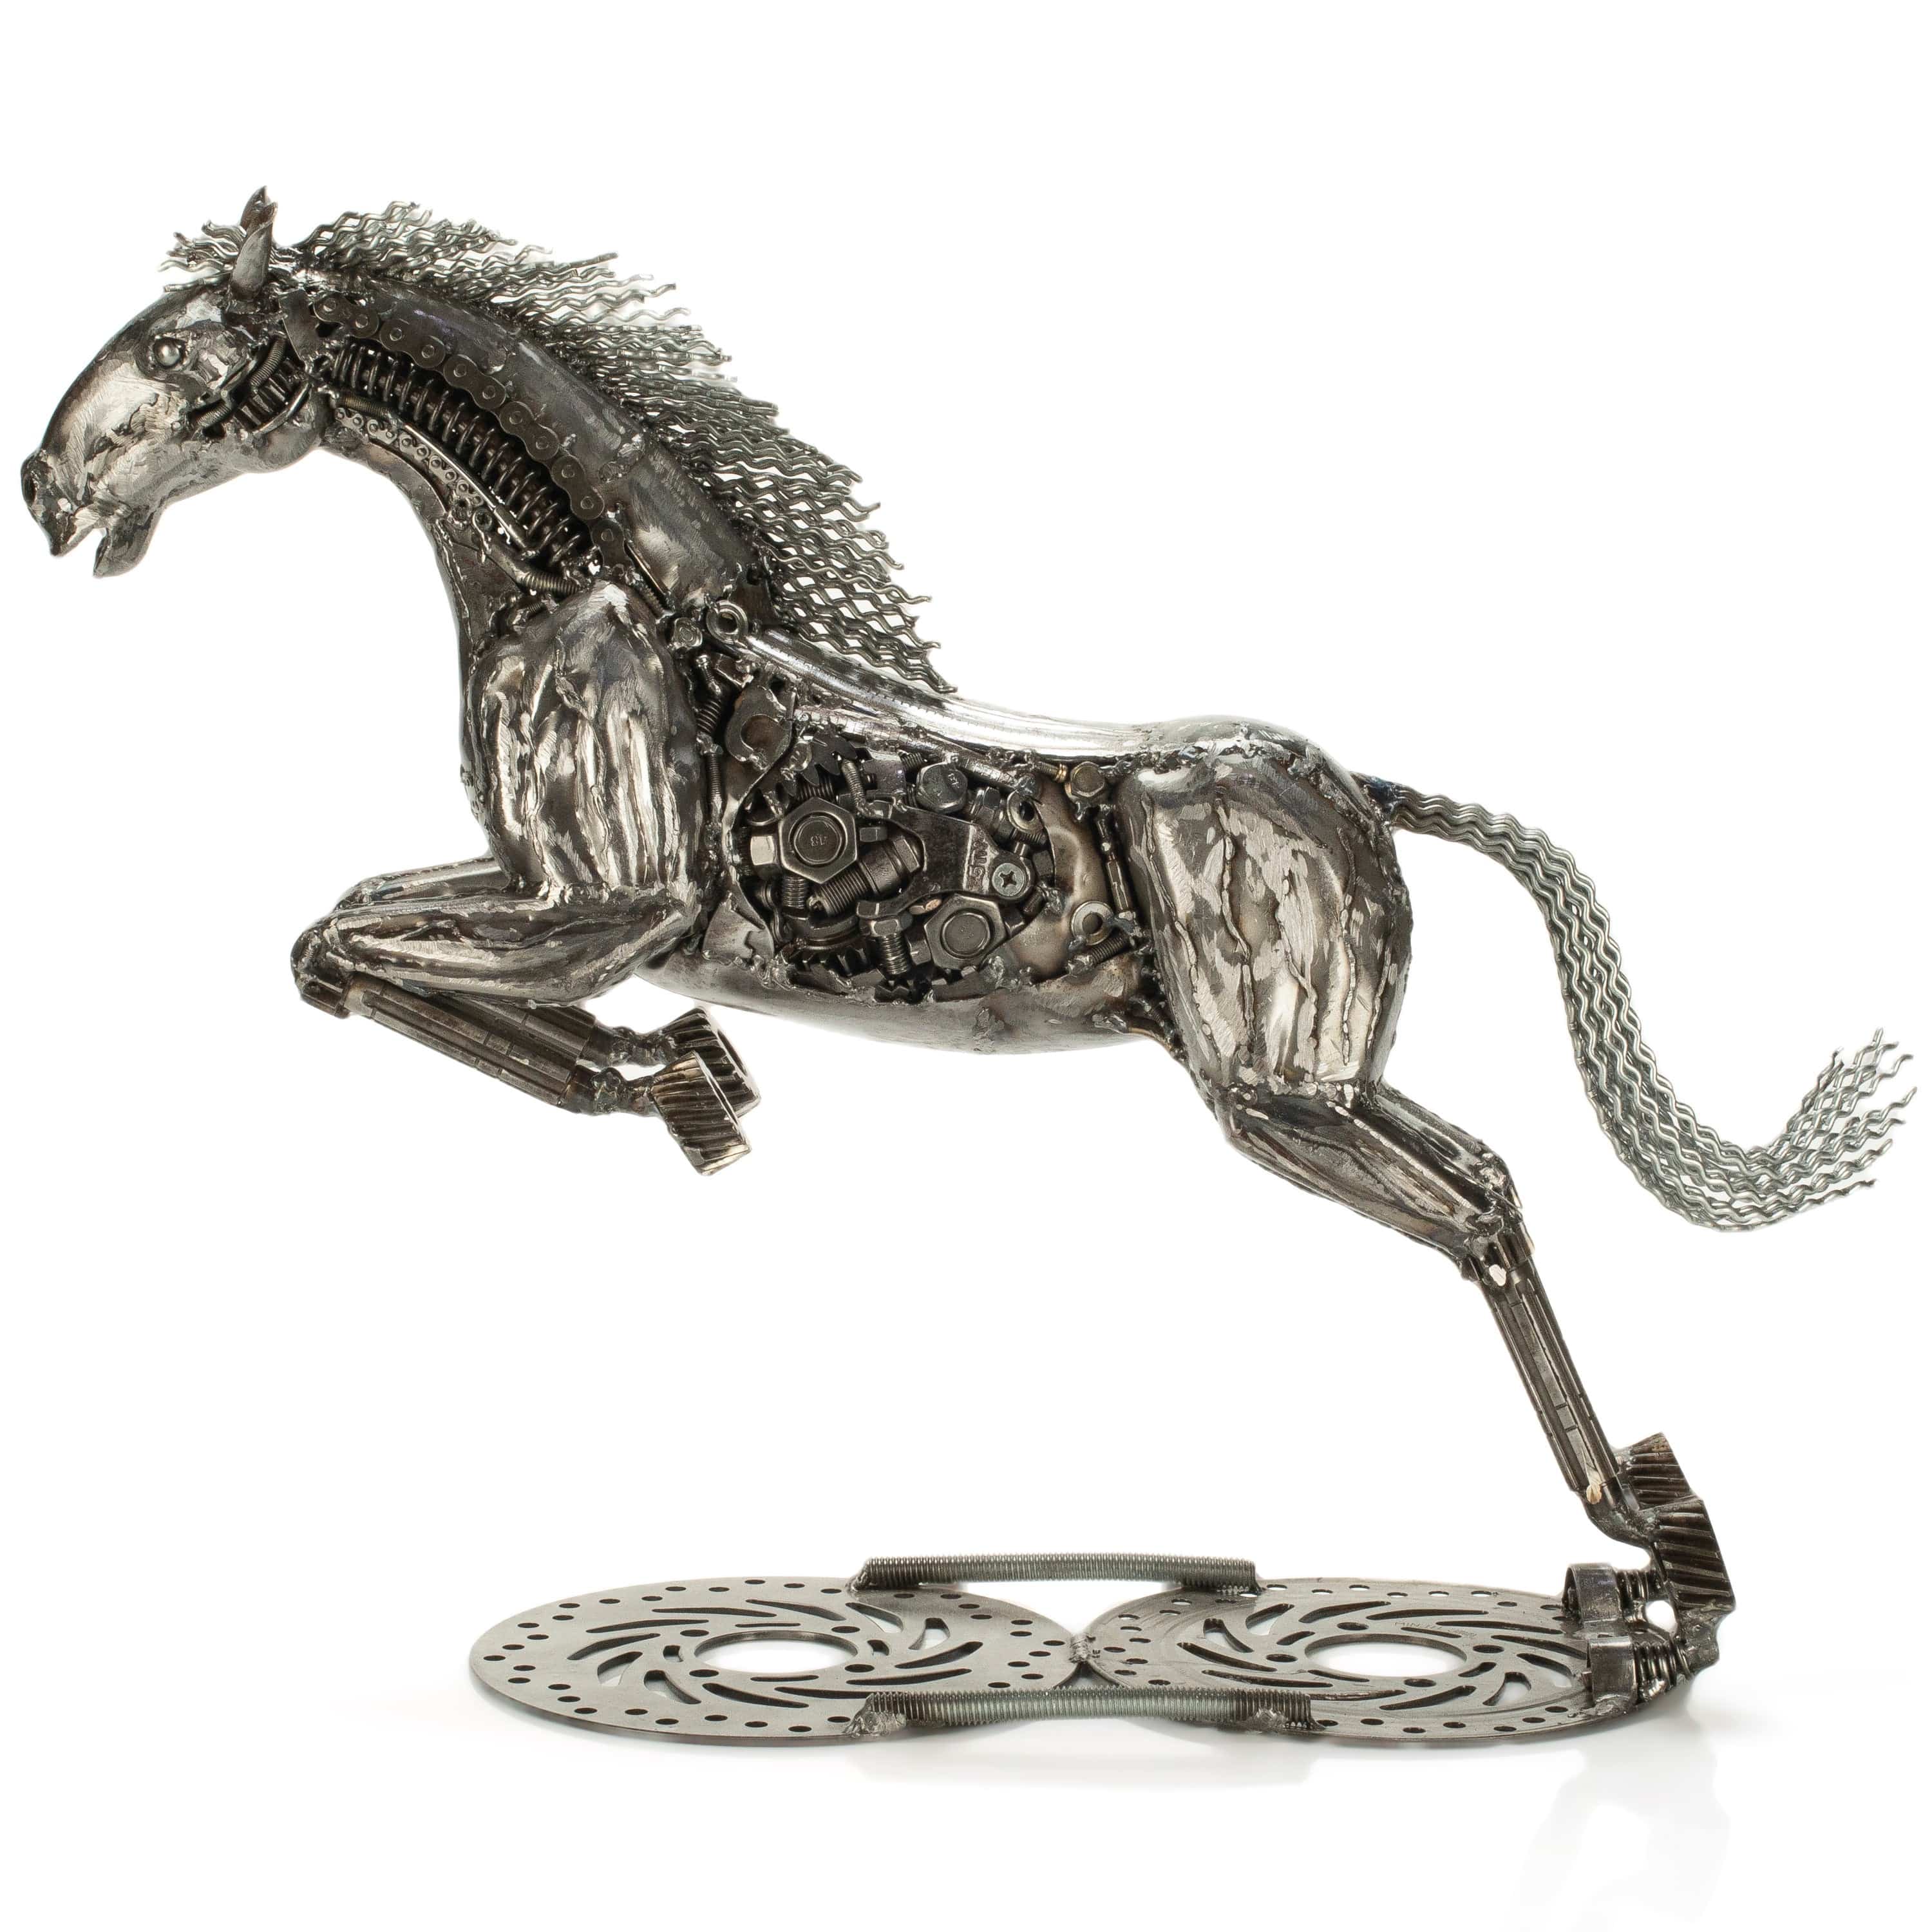 KALIFANO Recycled Metal Art 25" Horse Inspired Recycled Metal Art Sculpture RMS-HS69x63-PK